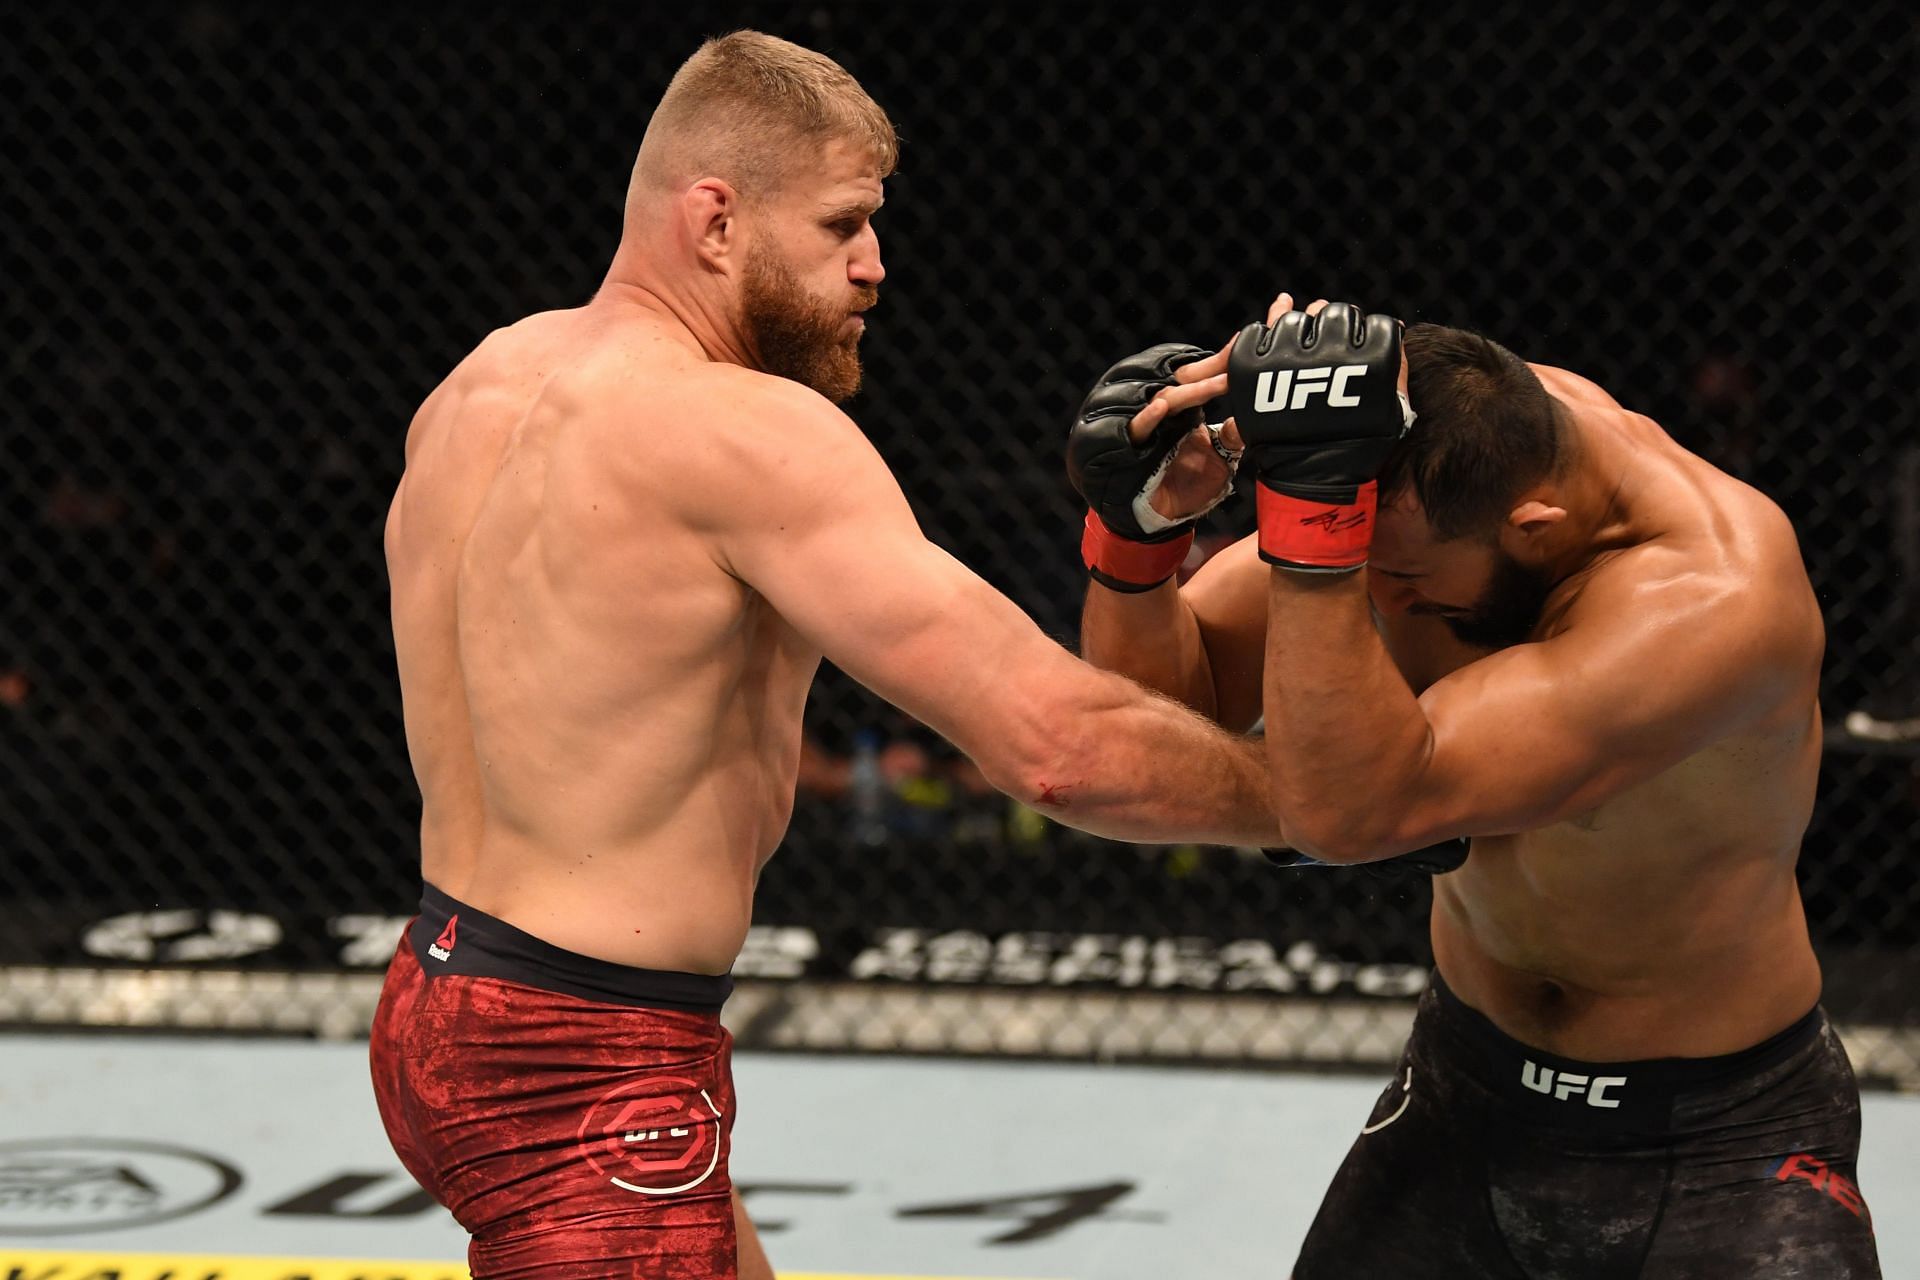 Jan Blachowicz has been on a genuinely tremendous run in recent years